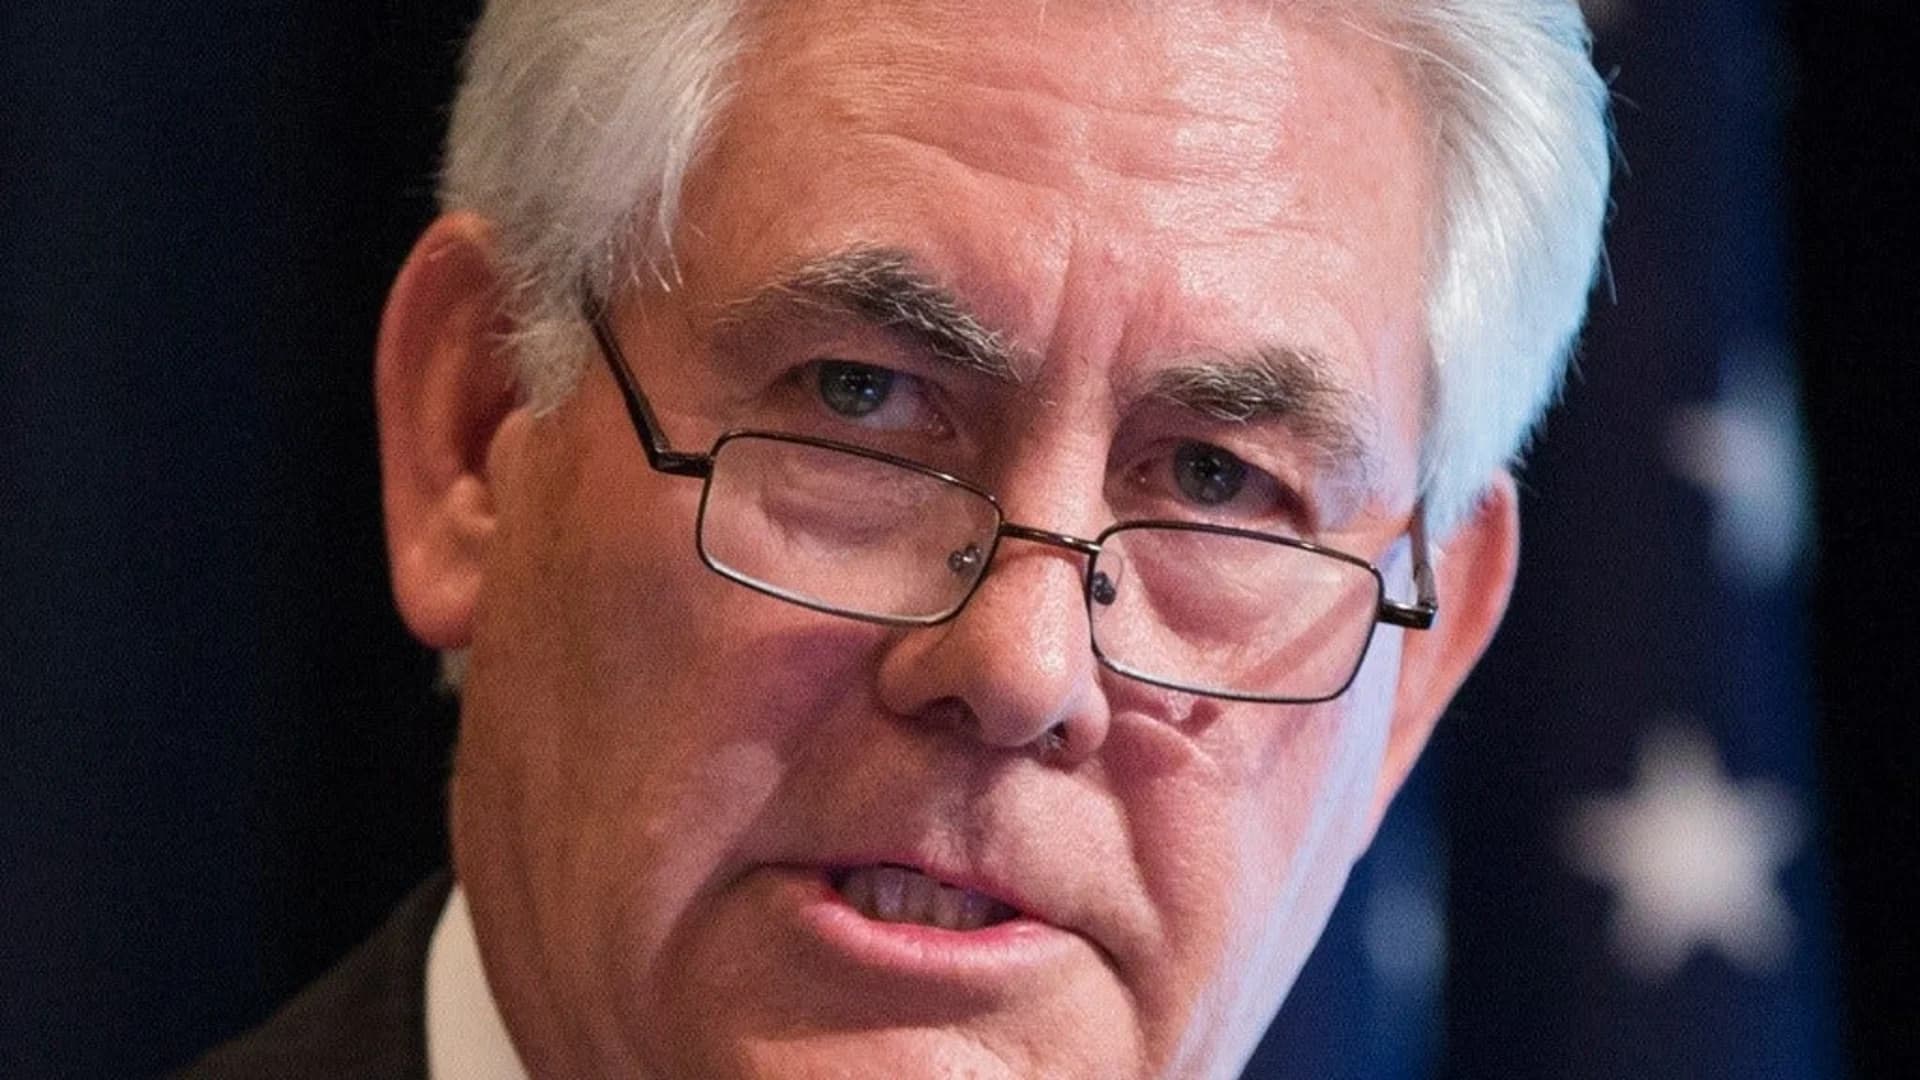 Tillerson out at State, to be replaced by CIA chief Pompeo